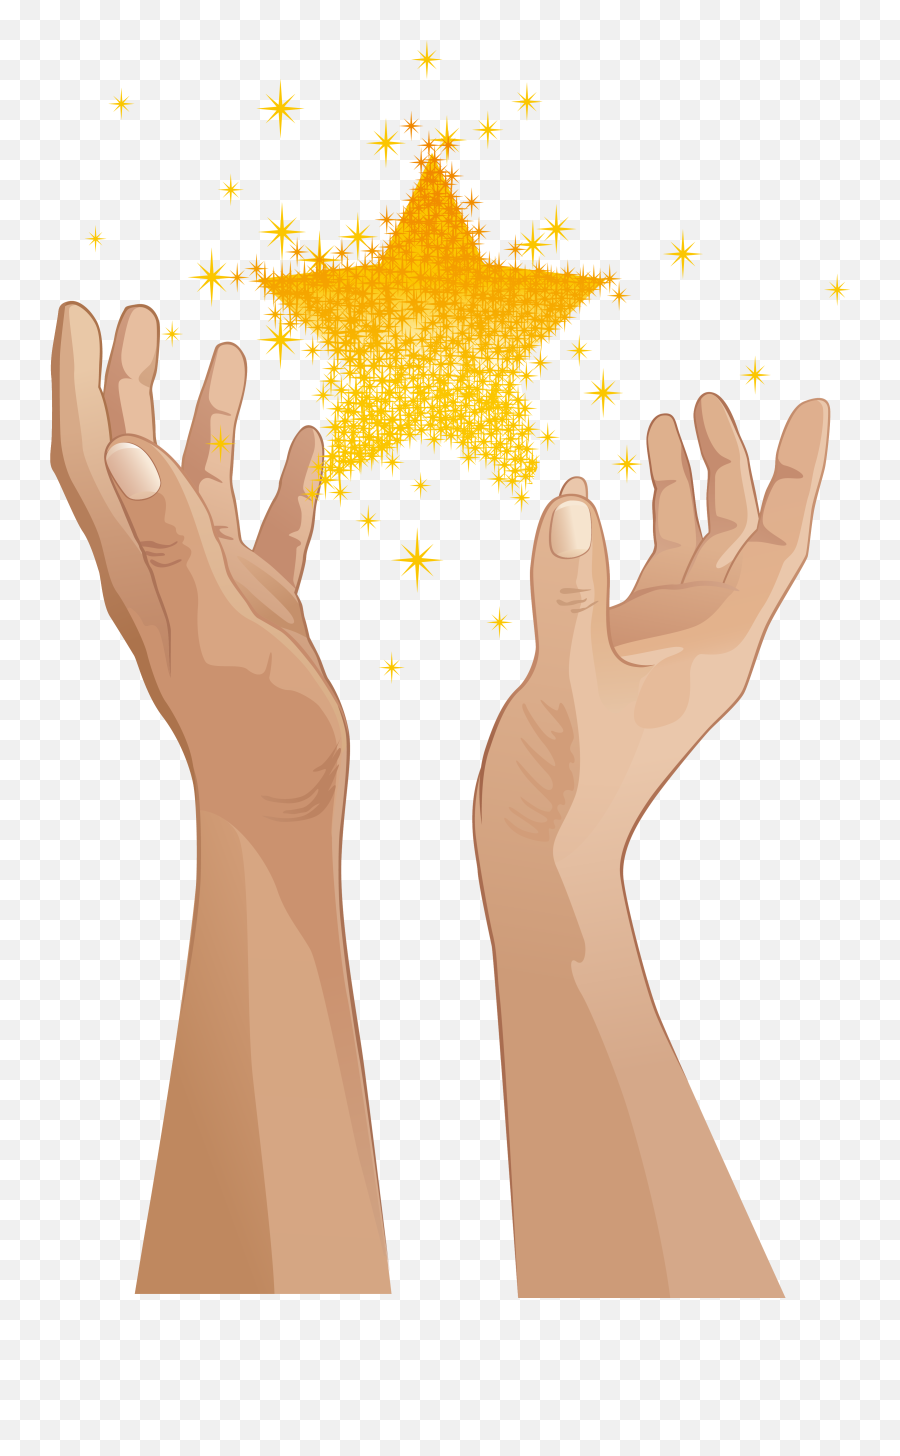 Reaching Hand Png - Star In Hand Vector Full Size Png Hand Reaching For The Stars,Hand Vector Png